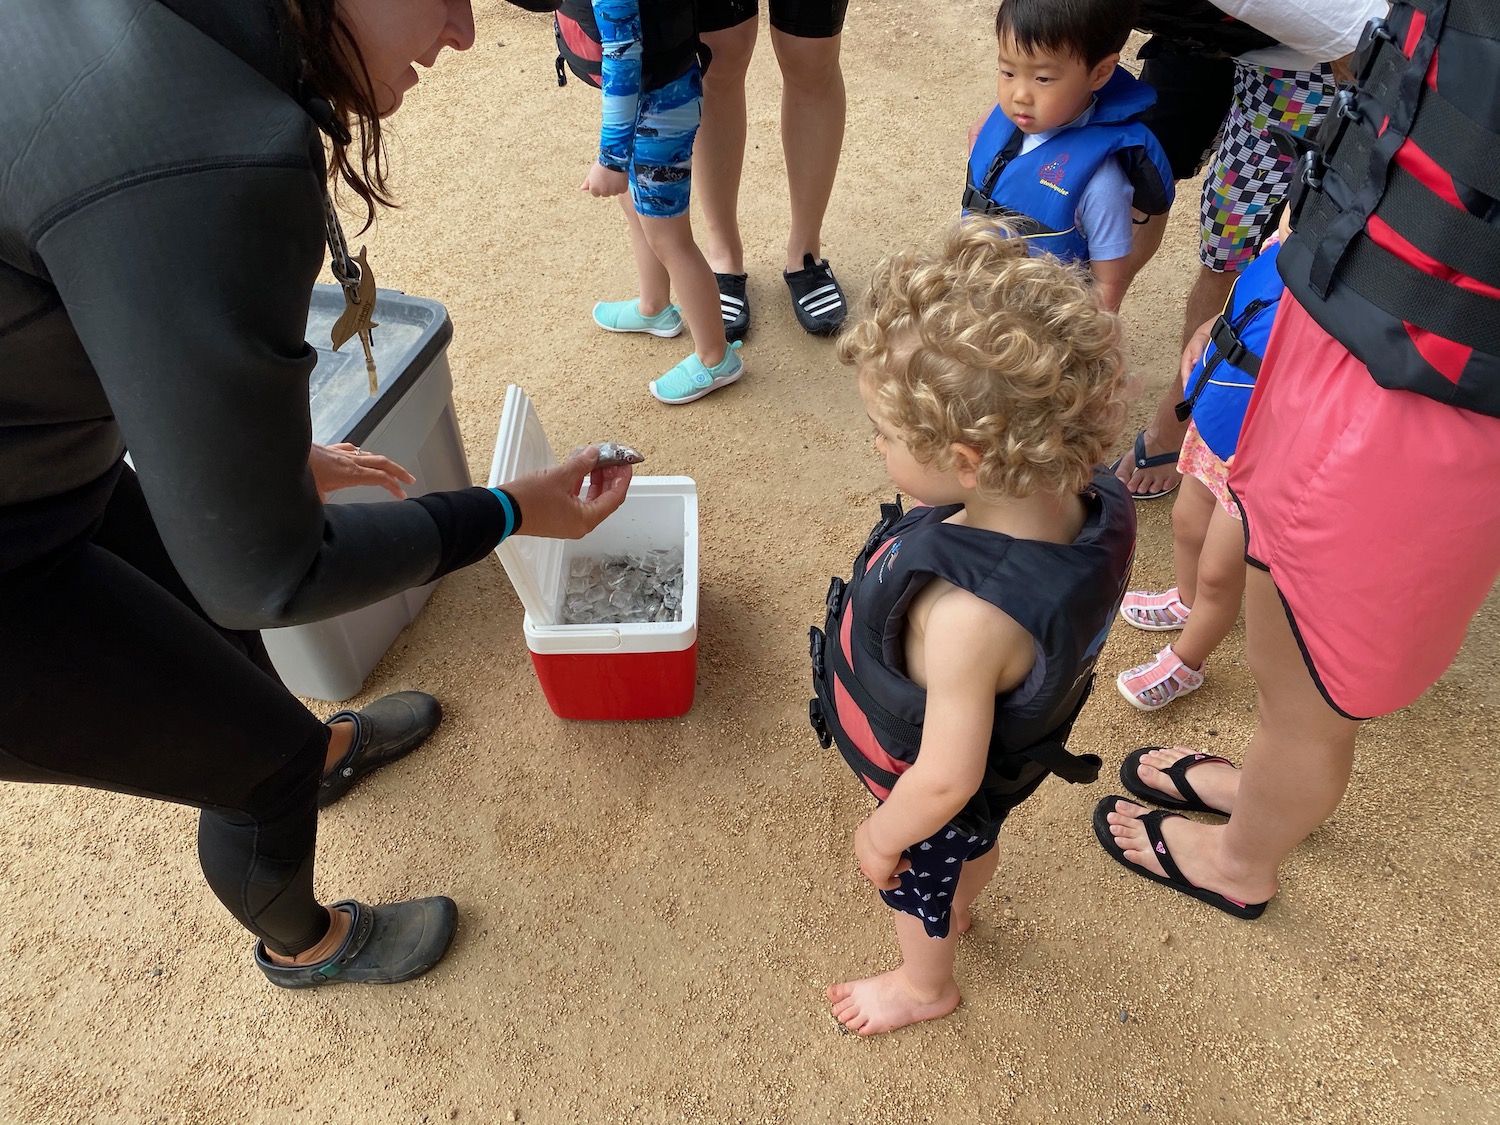 a group of people standing around a cooler and a child in life vest